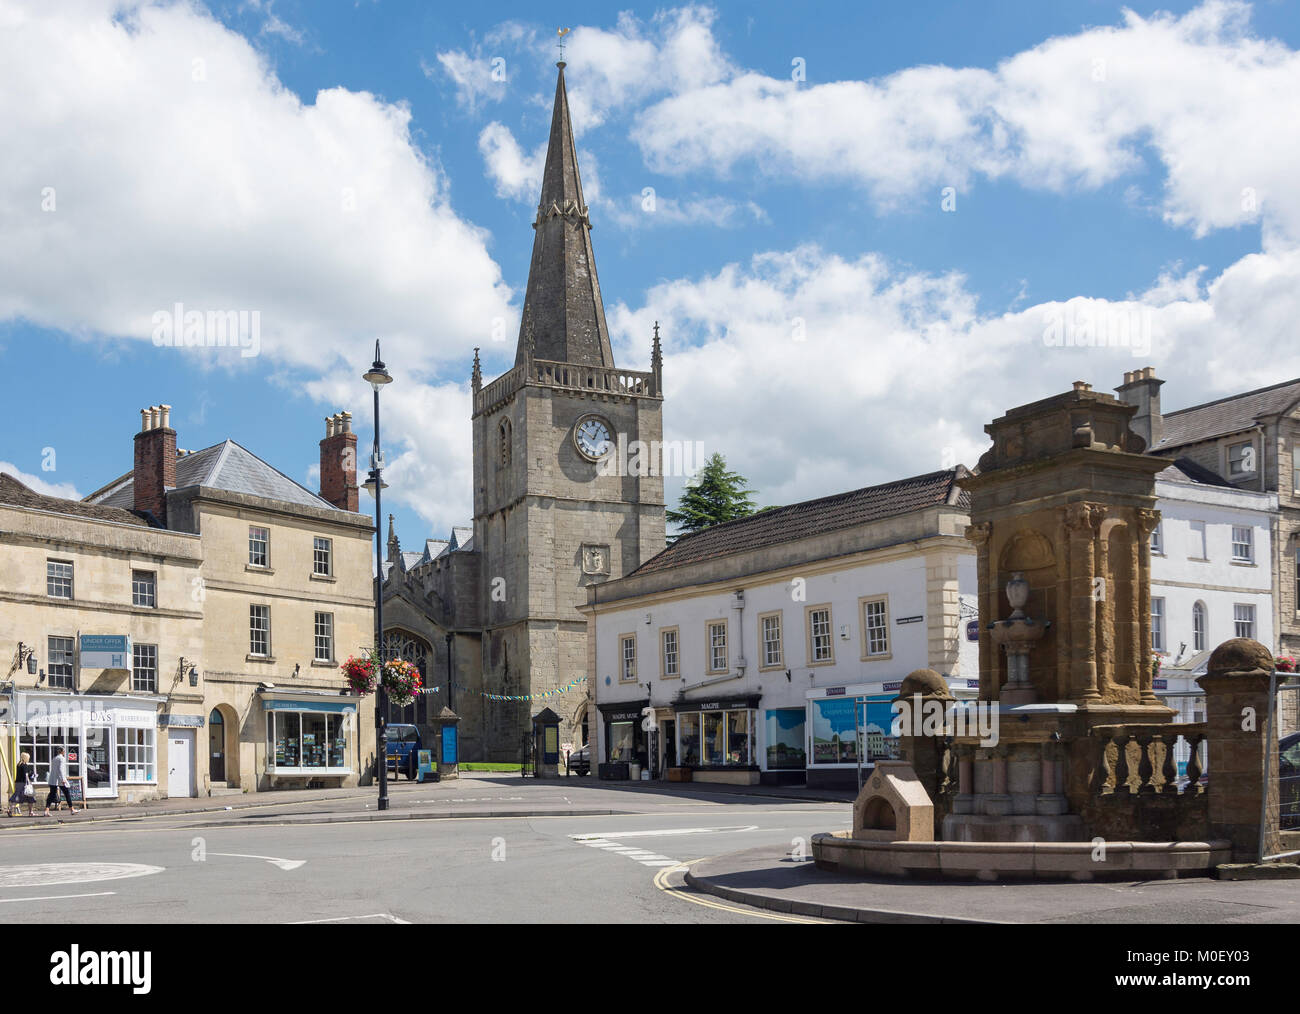 Market Place showing St Andrew's Anglican Church, Chippenham, Wiltshire, England, United Kingdom Stock Photo